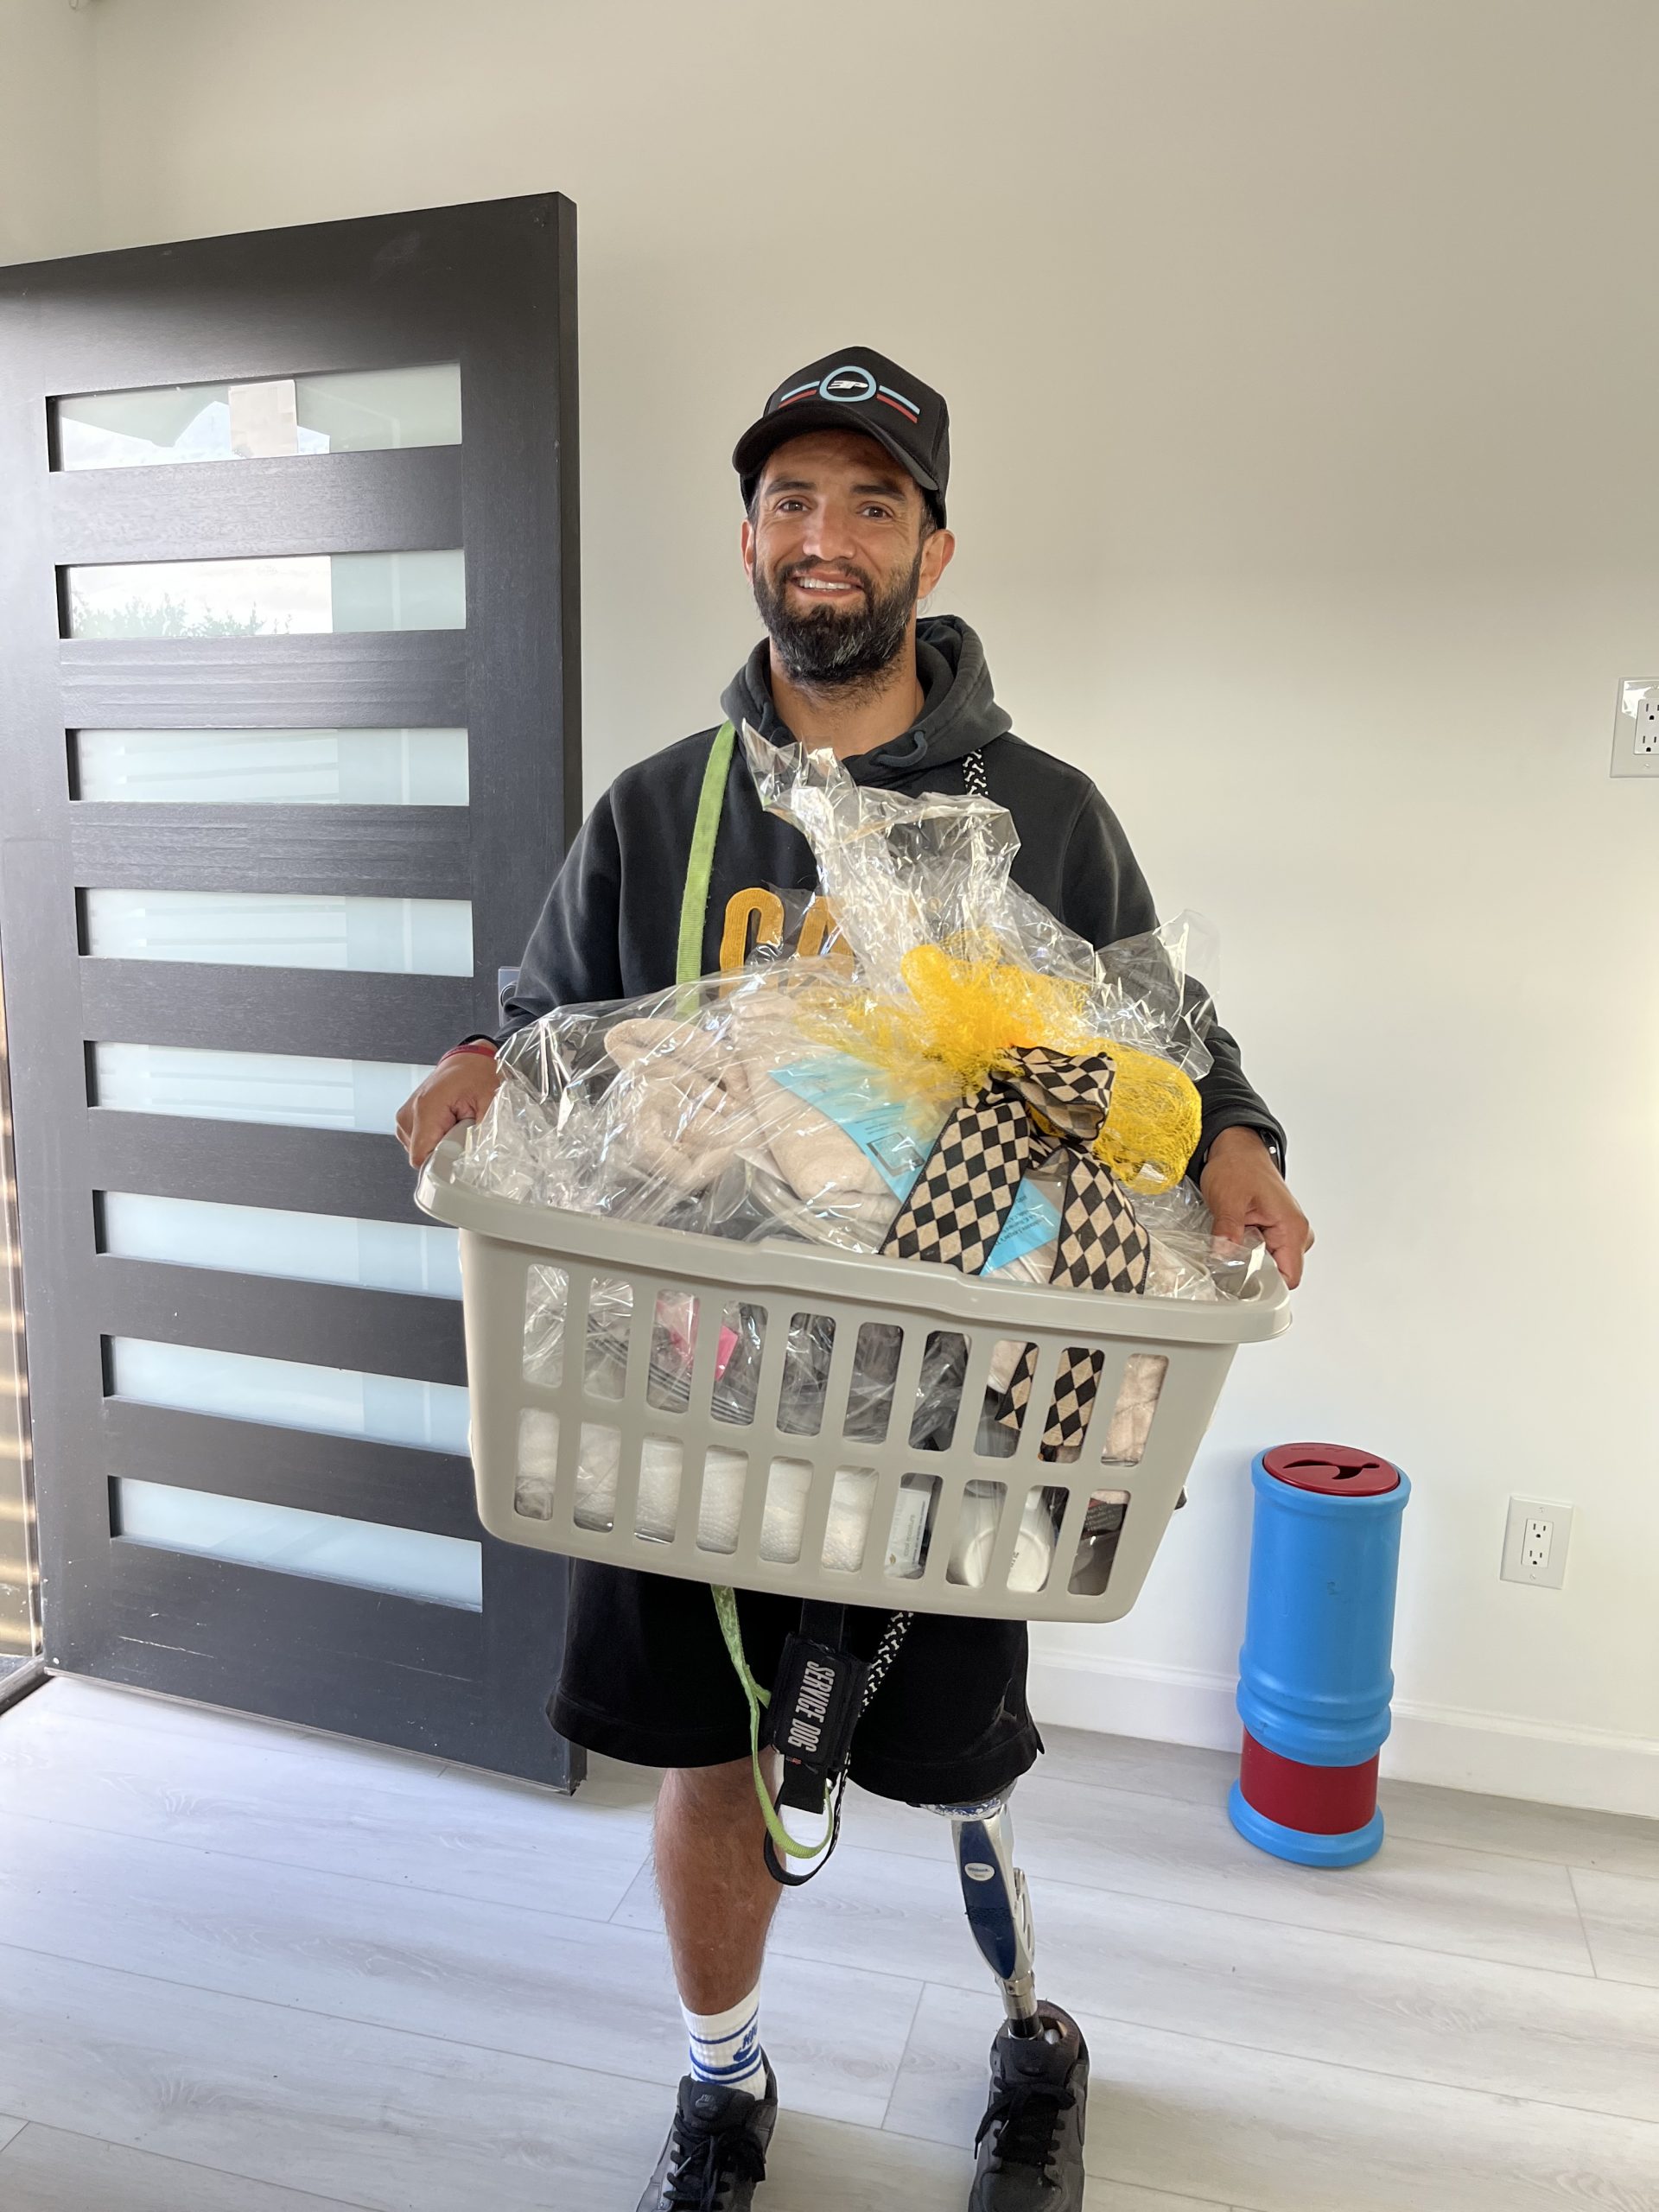 Photo of client in new home and holding a welcome home basket.